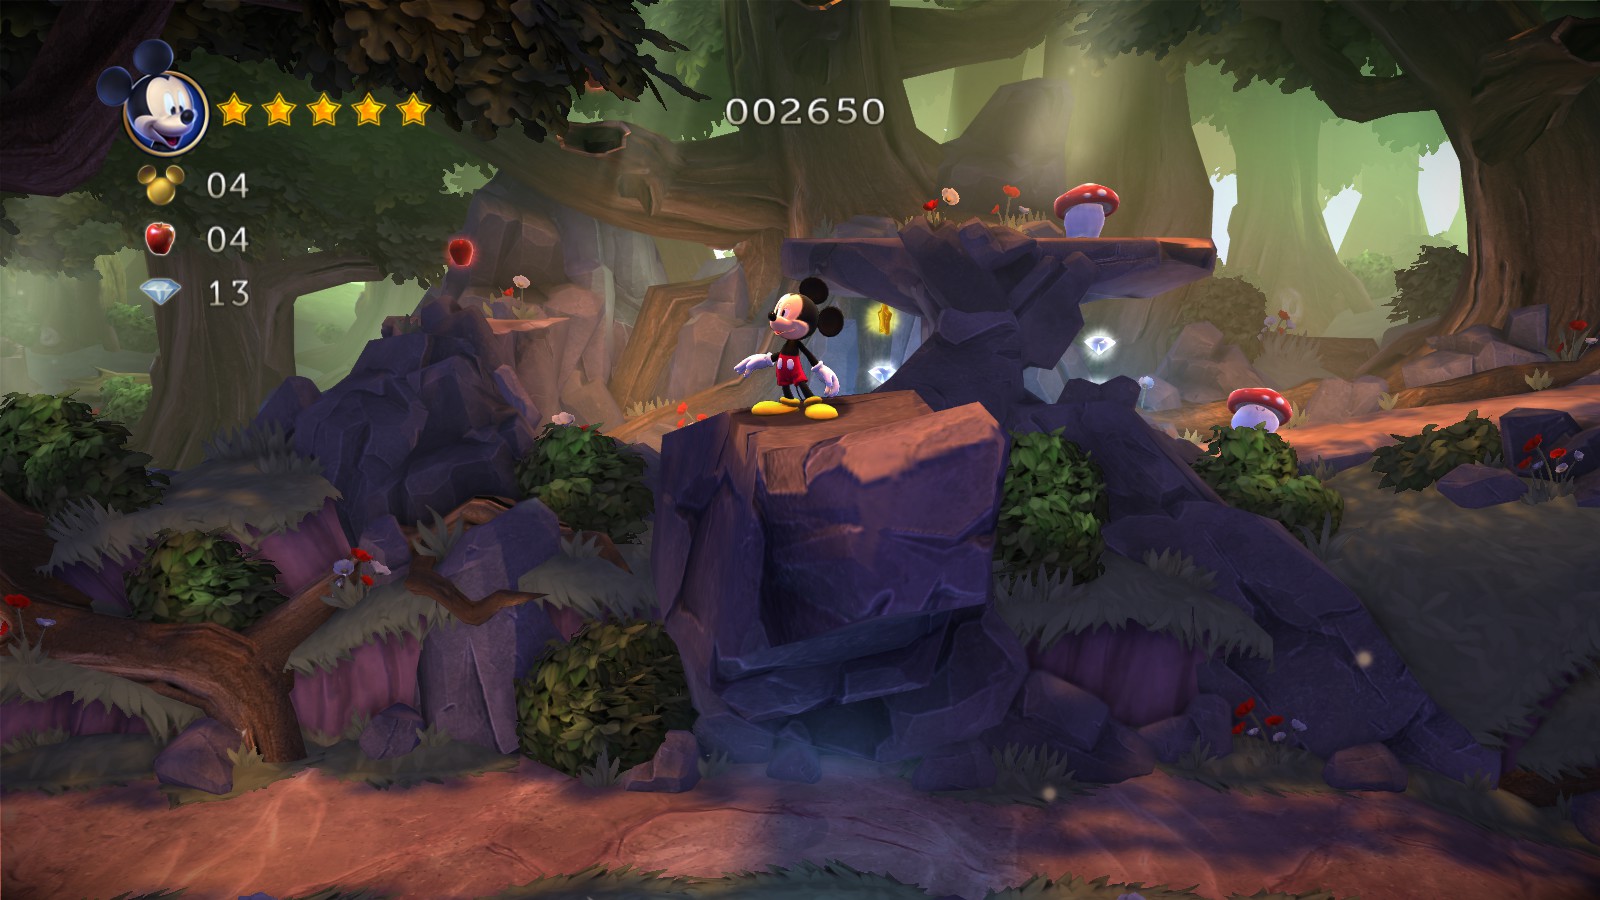 Игры illusion 2013. Castle of Illusion. Castle of Illusion Remastered. Illusion игра стим. Castle of Illusion starring Mickey Mouse.